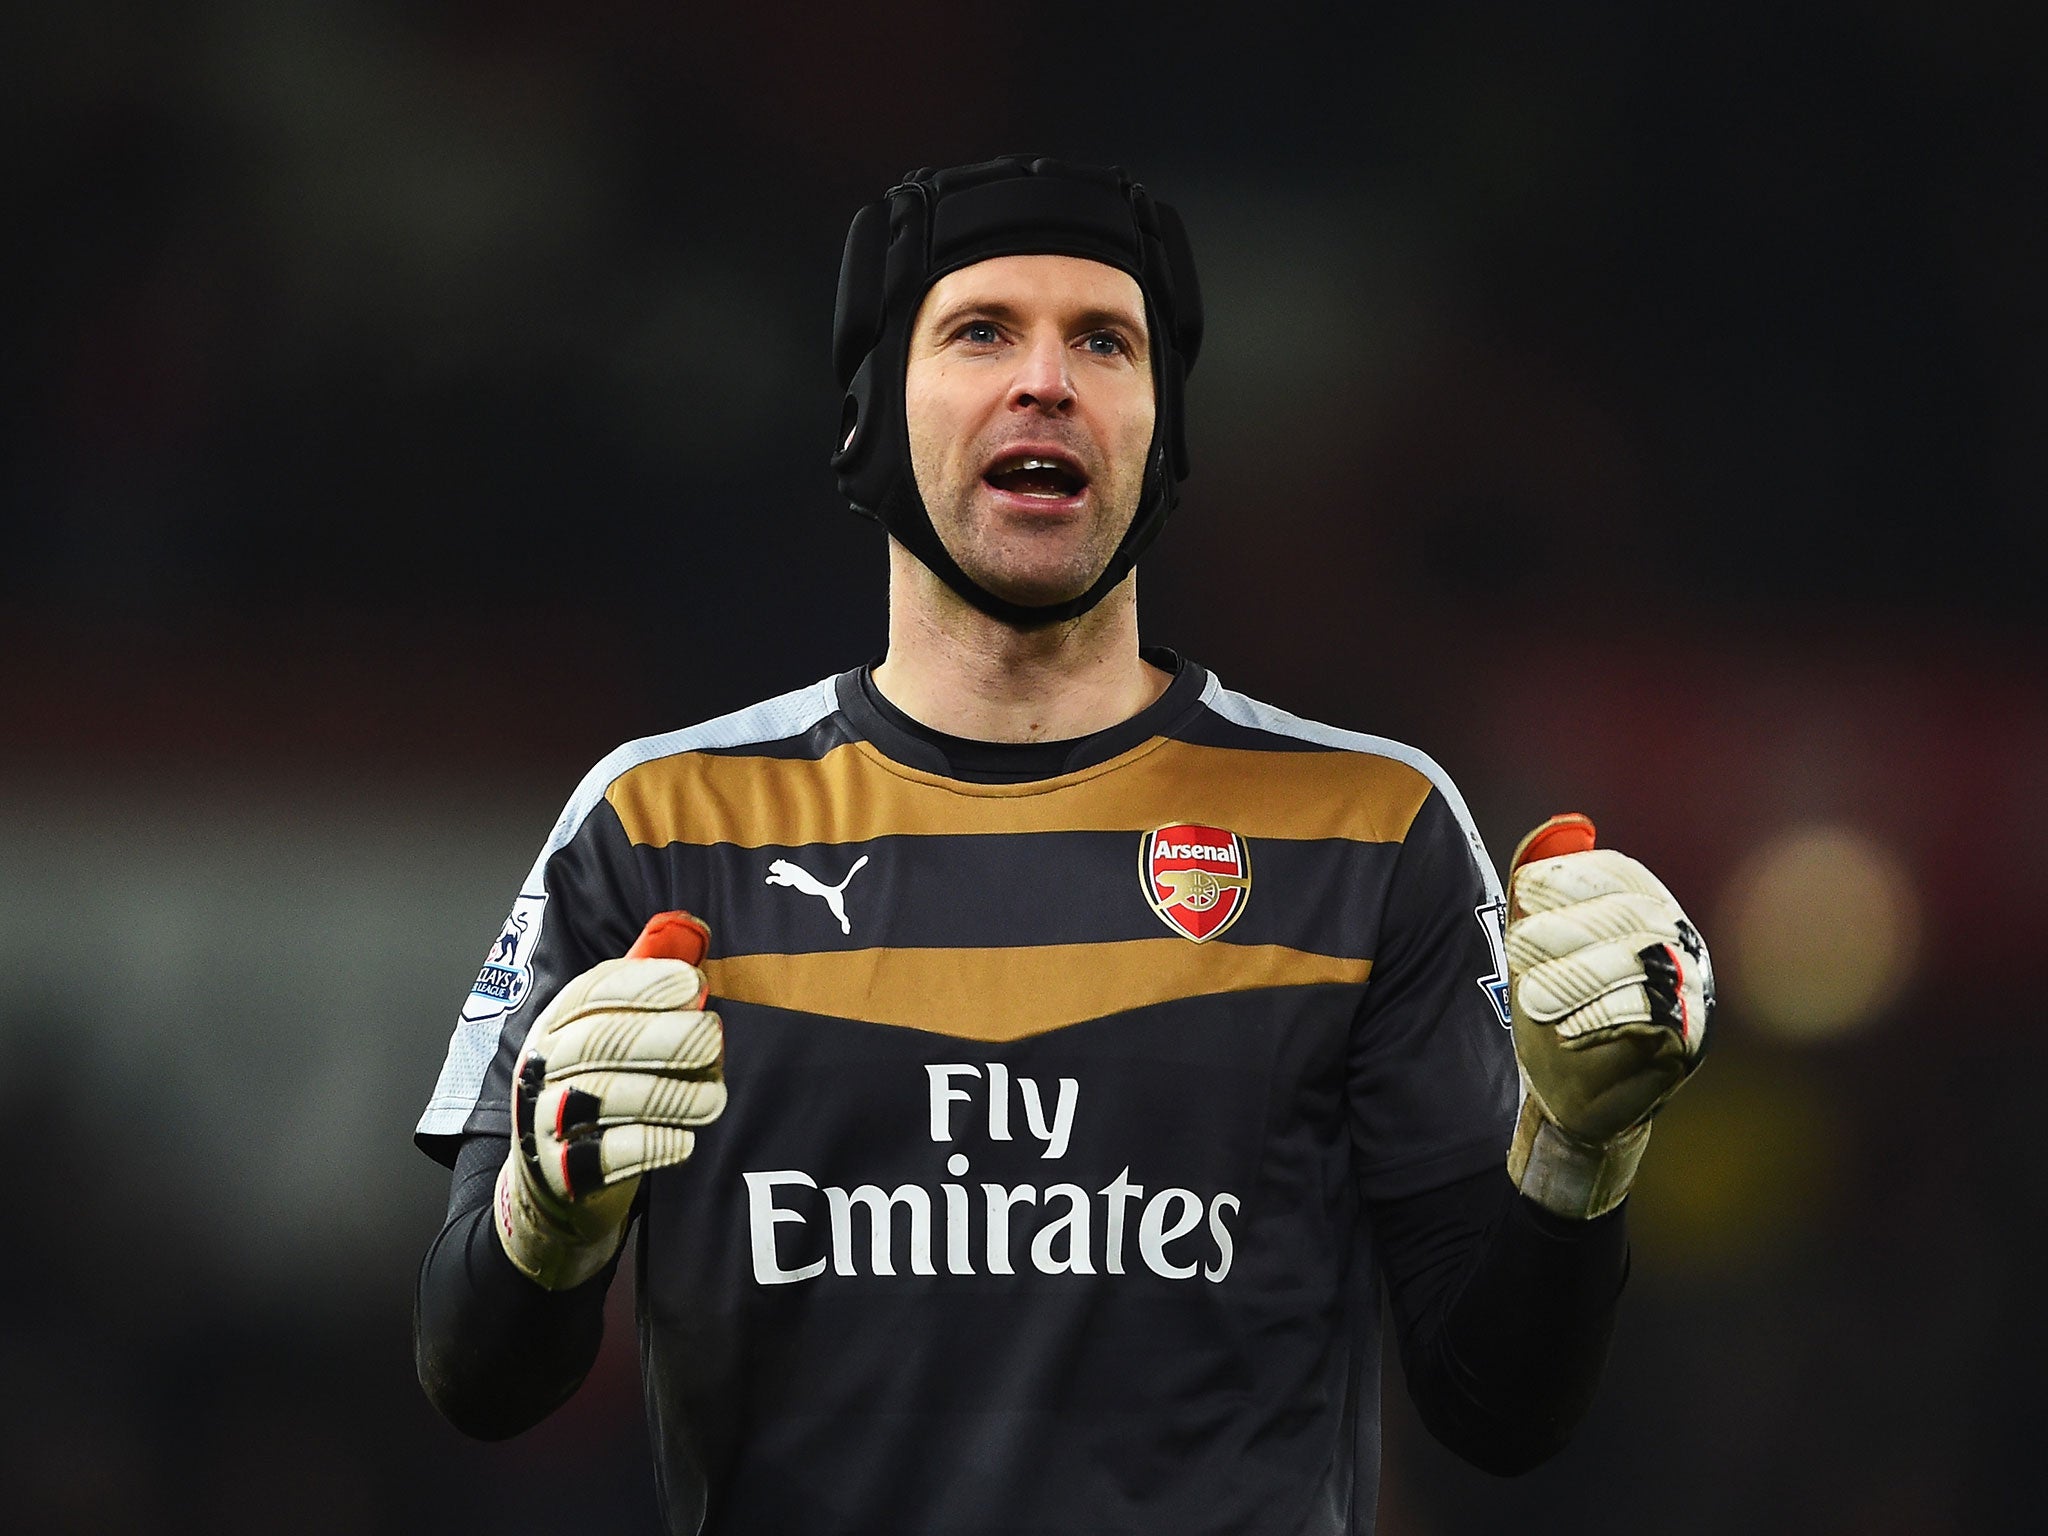 Petr Cech took the plaudits for his performance as well as lifting the Arsenal side after the 0-0 draw with Stoke